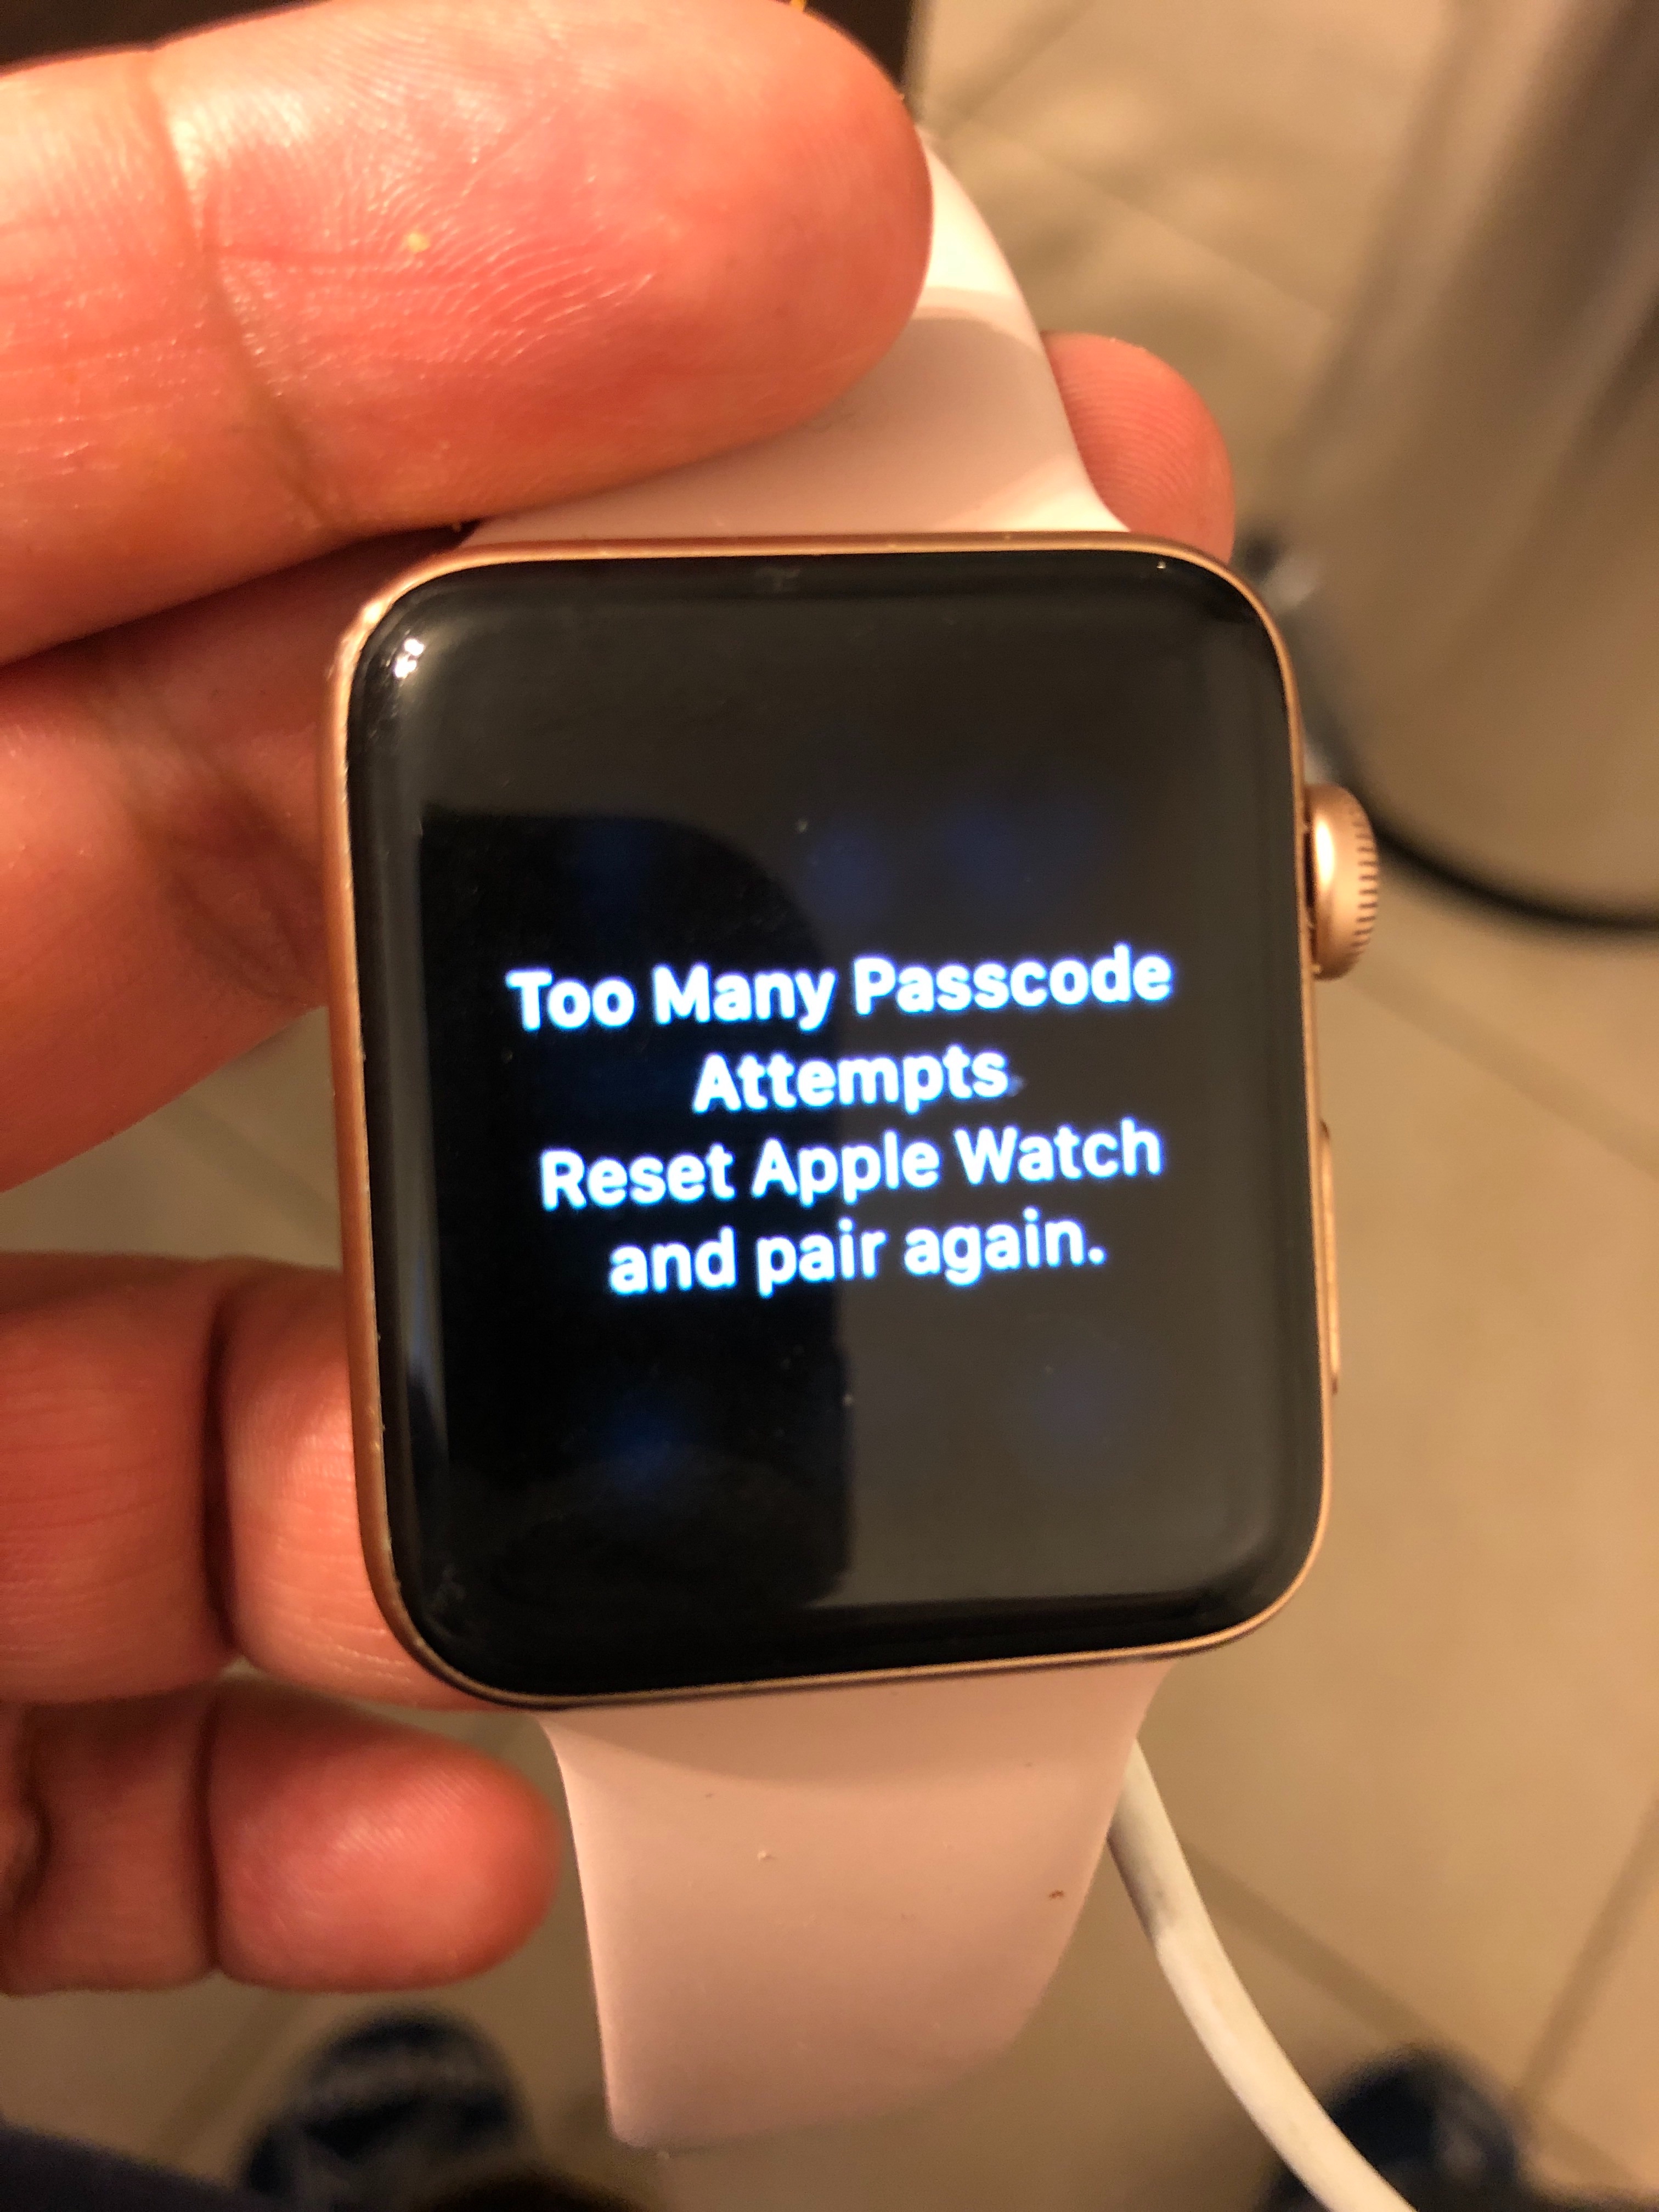 My i watch series 17 is locked and says to - Apple Community